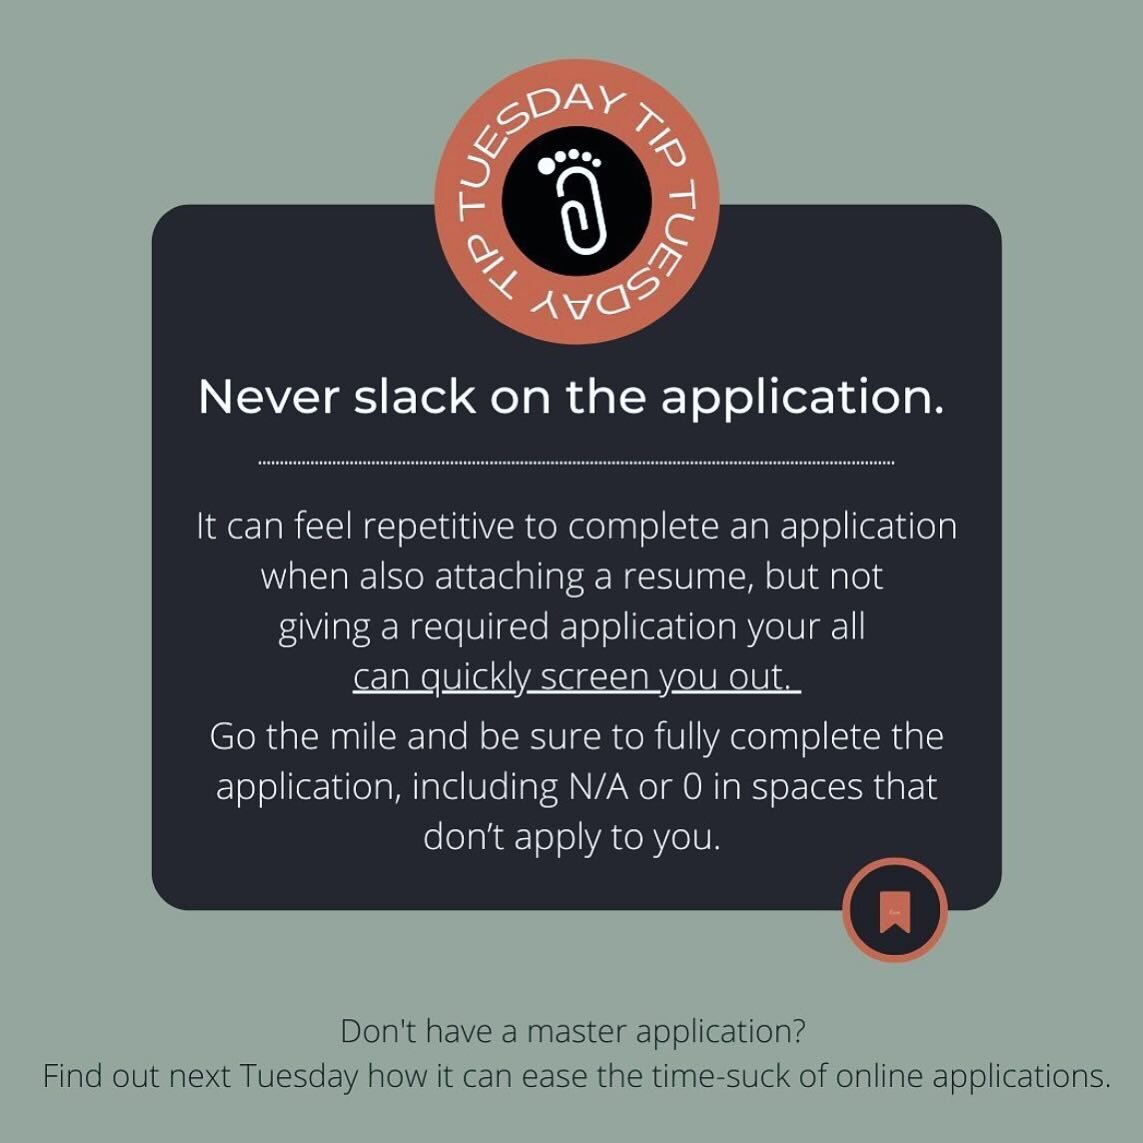 There&rsquo;s no way around it: completing online applications isn&rsquo;t fun. Applicants cutting corners, however, is an easy way for employers to reduce their stack of applicants. 

Next week: how a master app can make online apps less painful and